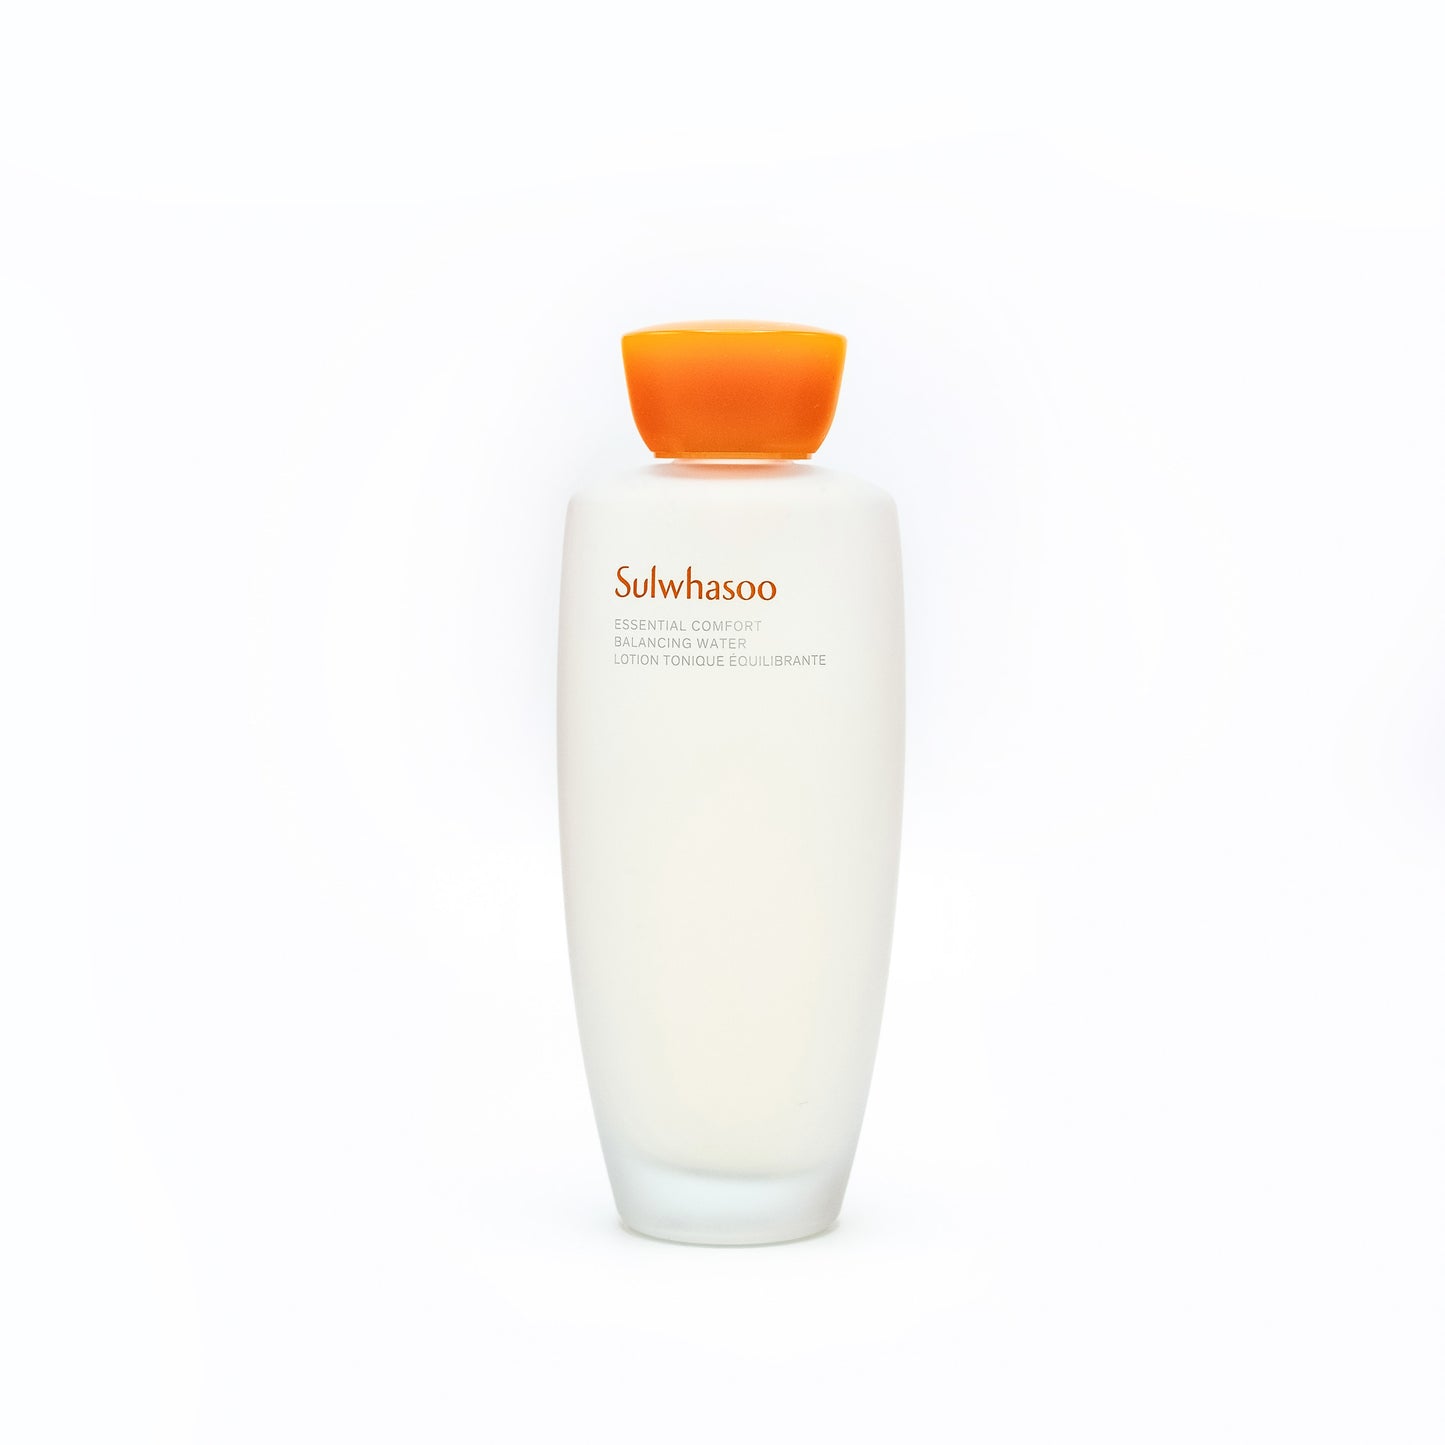 【Pre-sale】Sulwhasoo Essential Comfort Balancing Daily Routine (6 Items)